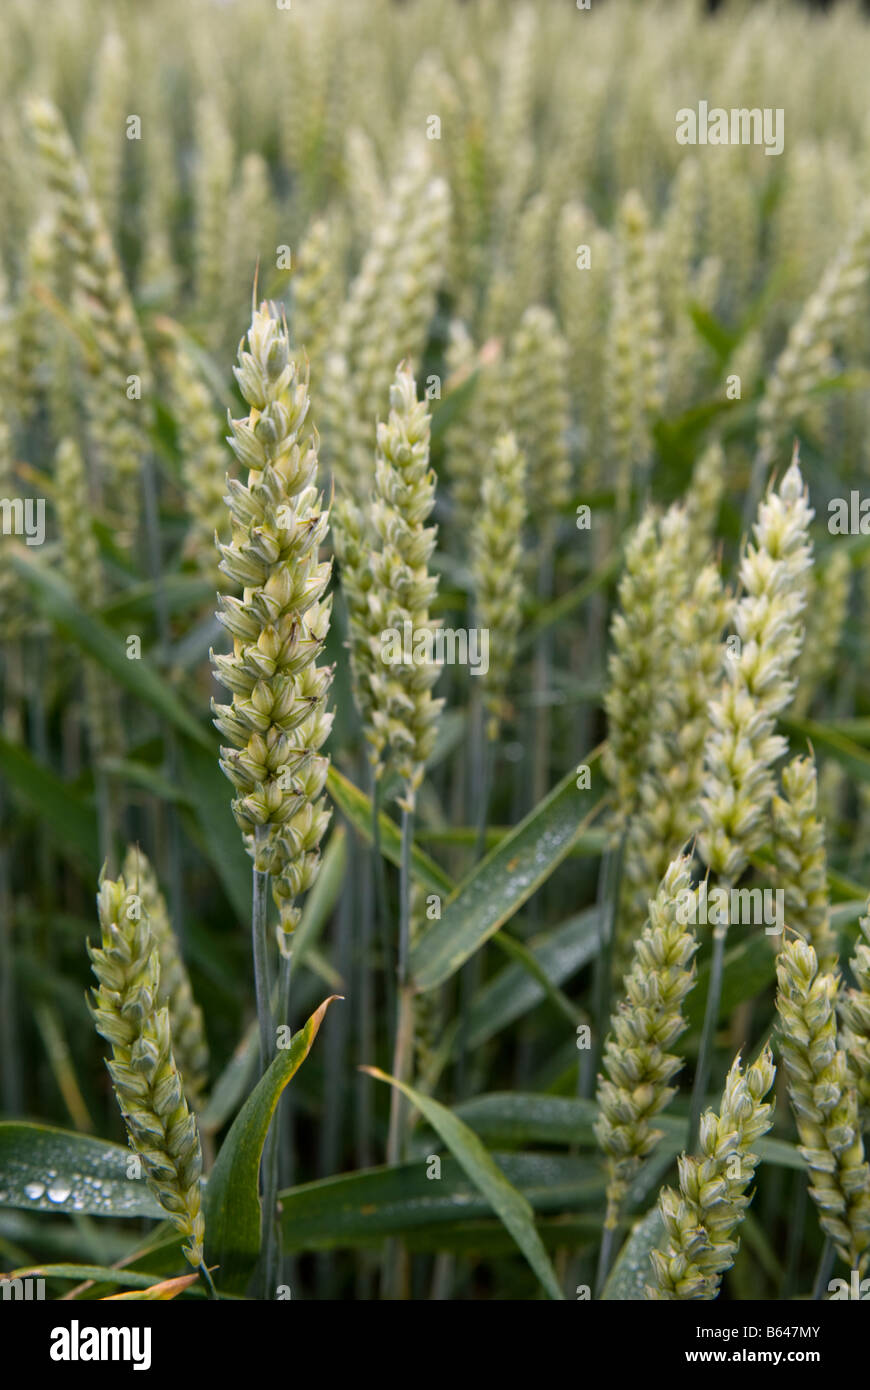 Agriculture in Sweden. Growing wheat. Stock Photo